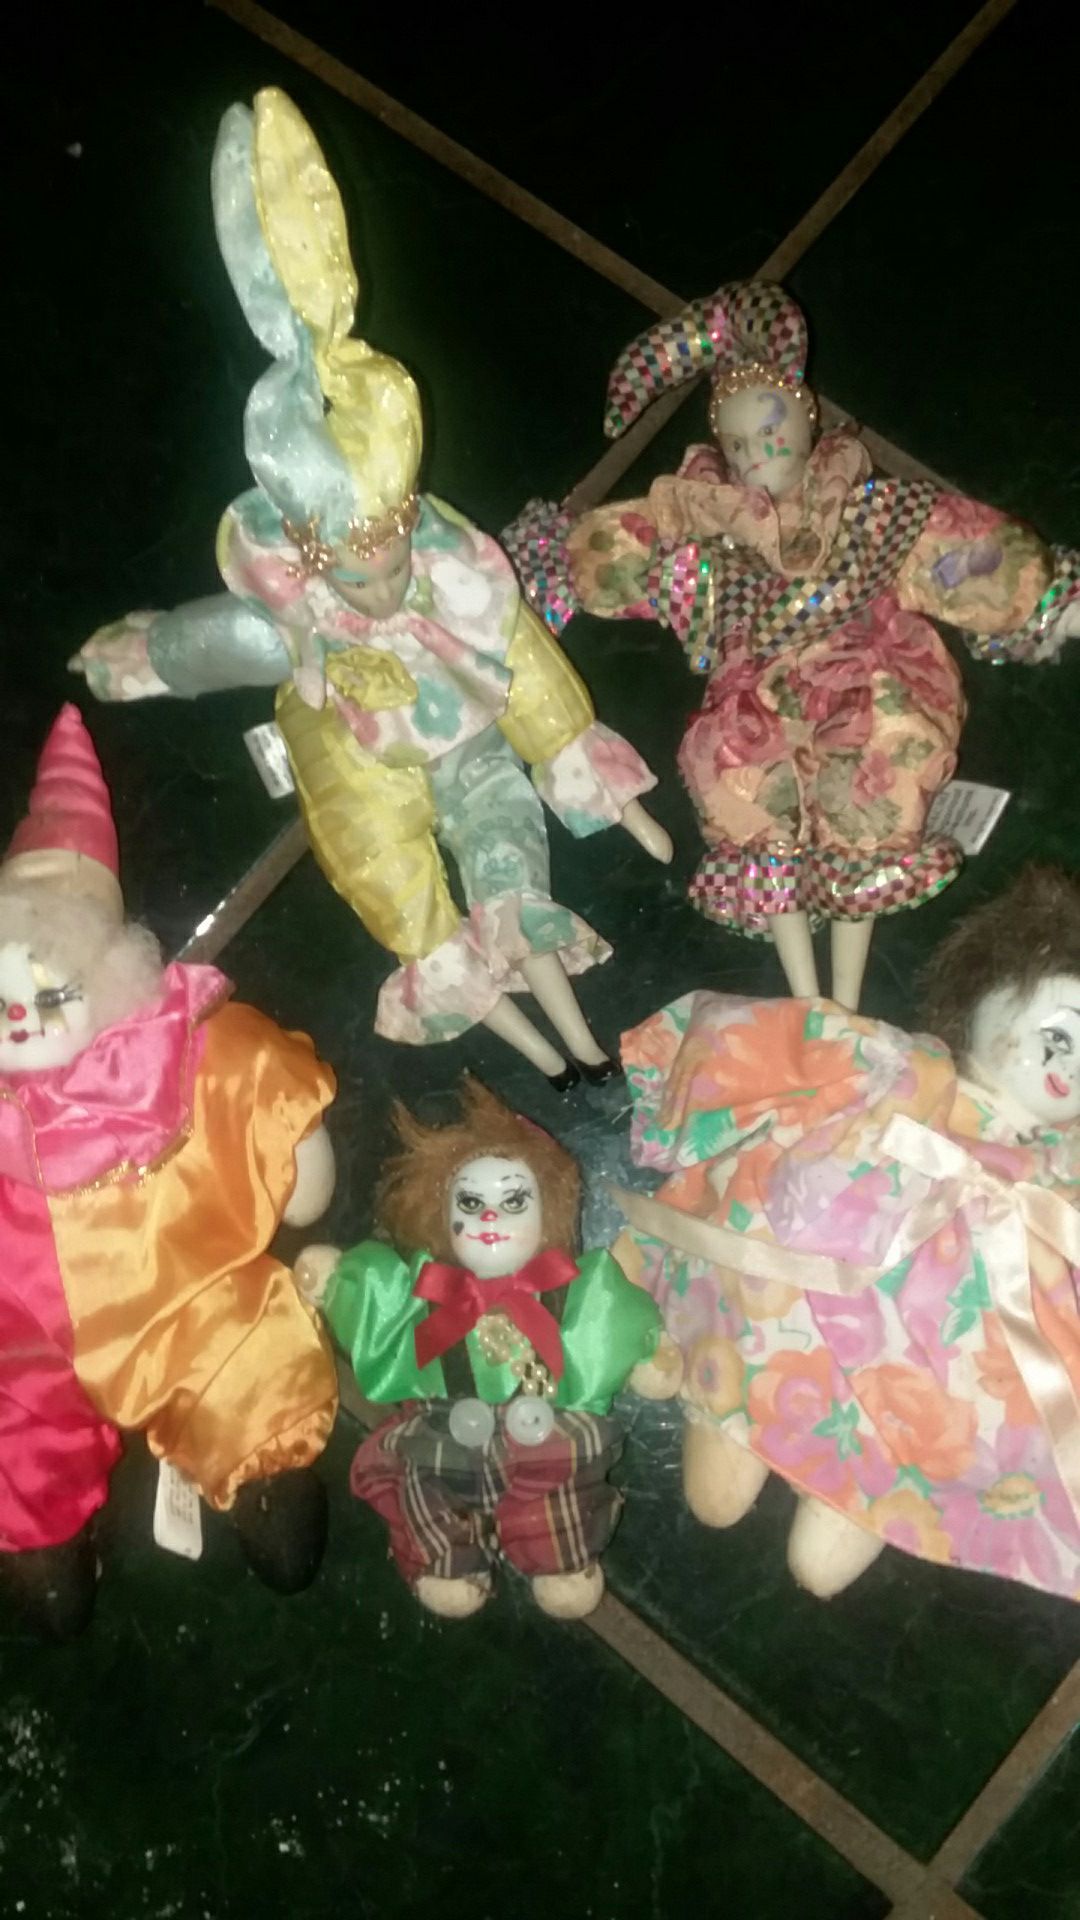 Antique clown and jester dolls